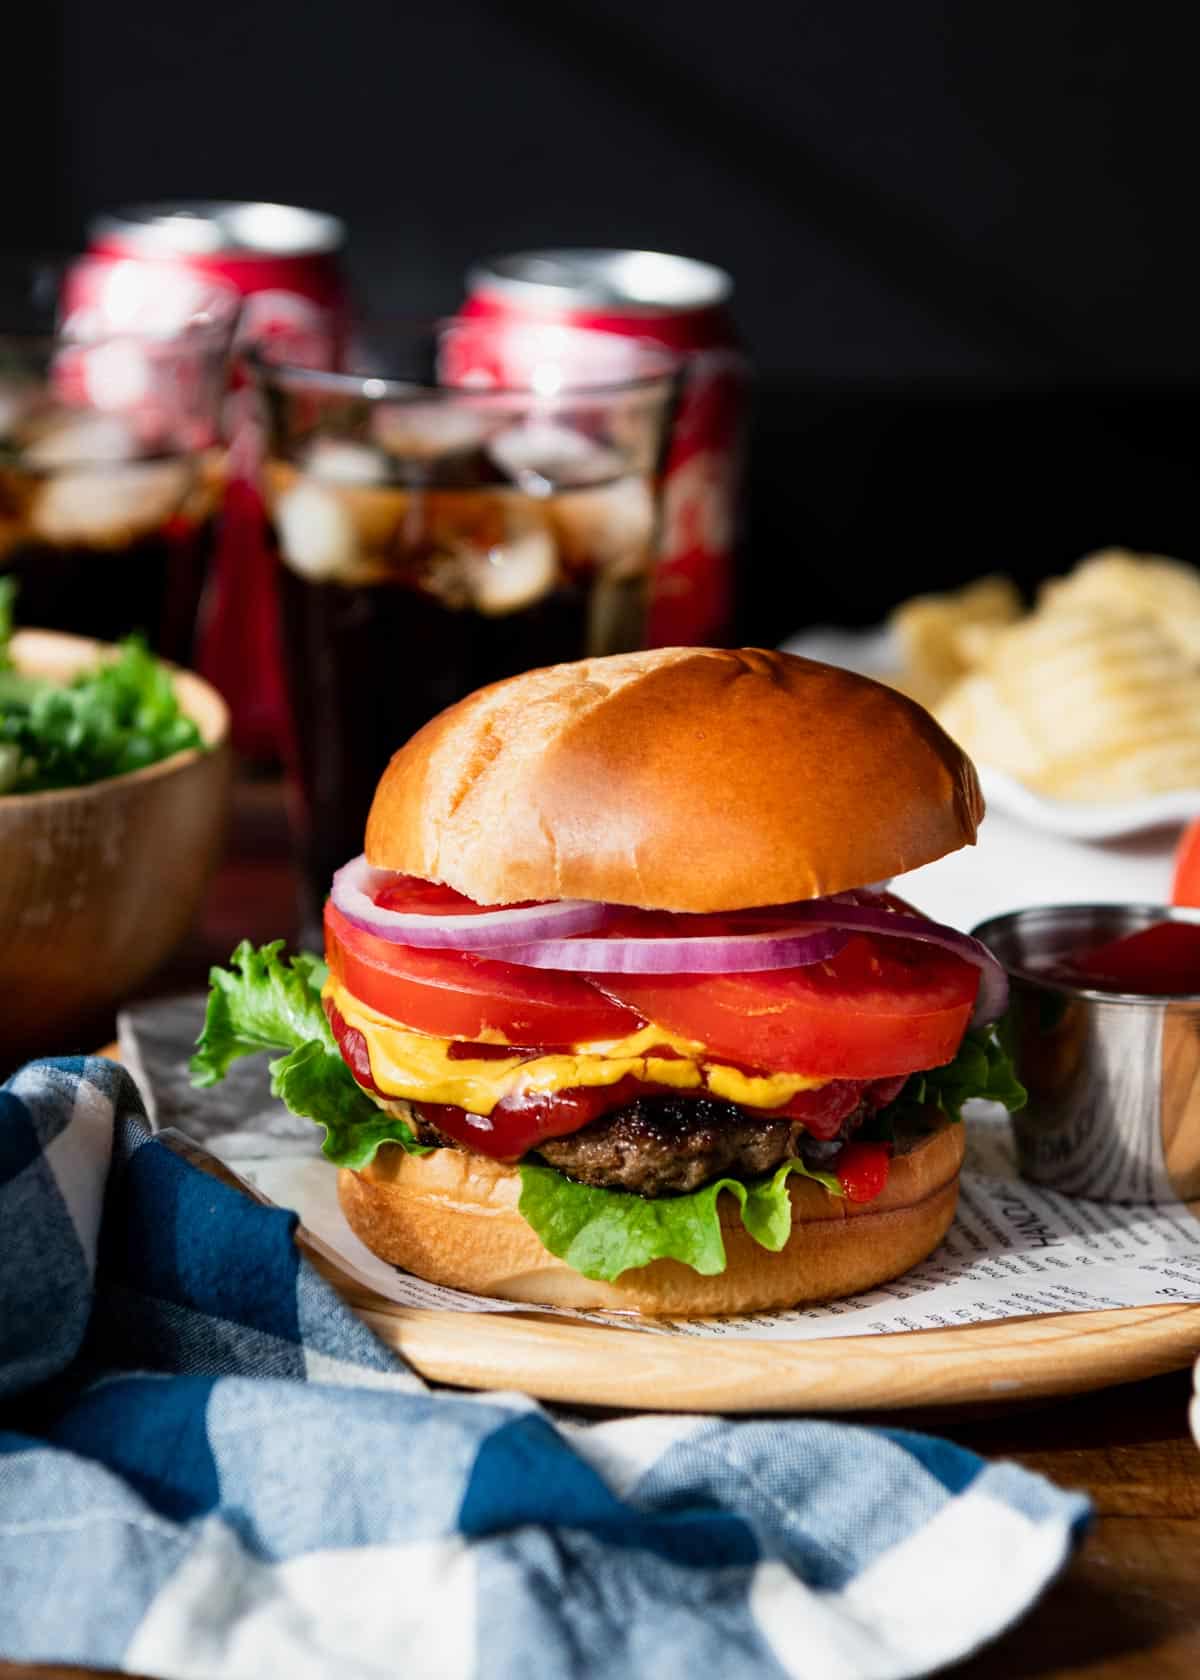 Skillet burgers on a wooden plate with chips and coke in the background.